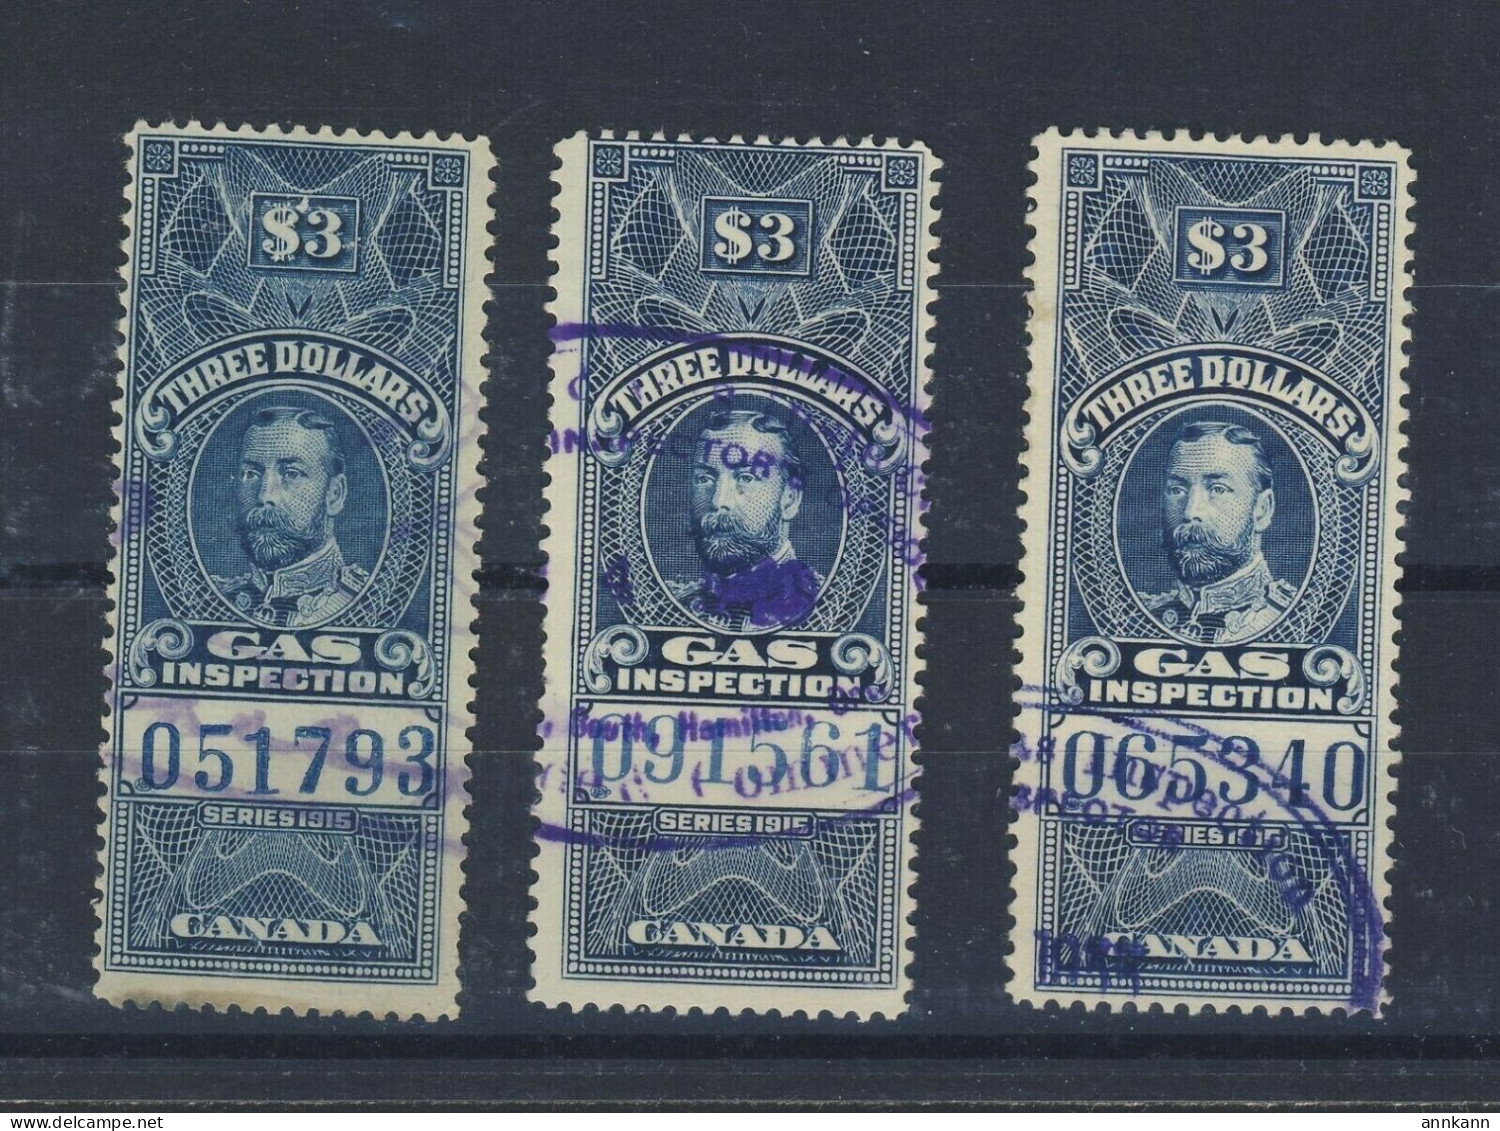 3x Canada Revenue Gas $3.00 Used Stamps #FG31 -$3.00 Blue Guide Value = $21.00 - Steuermarken